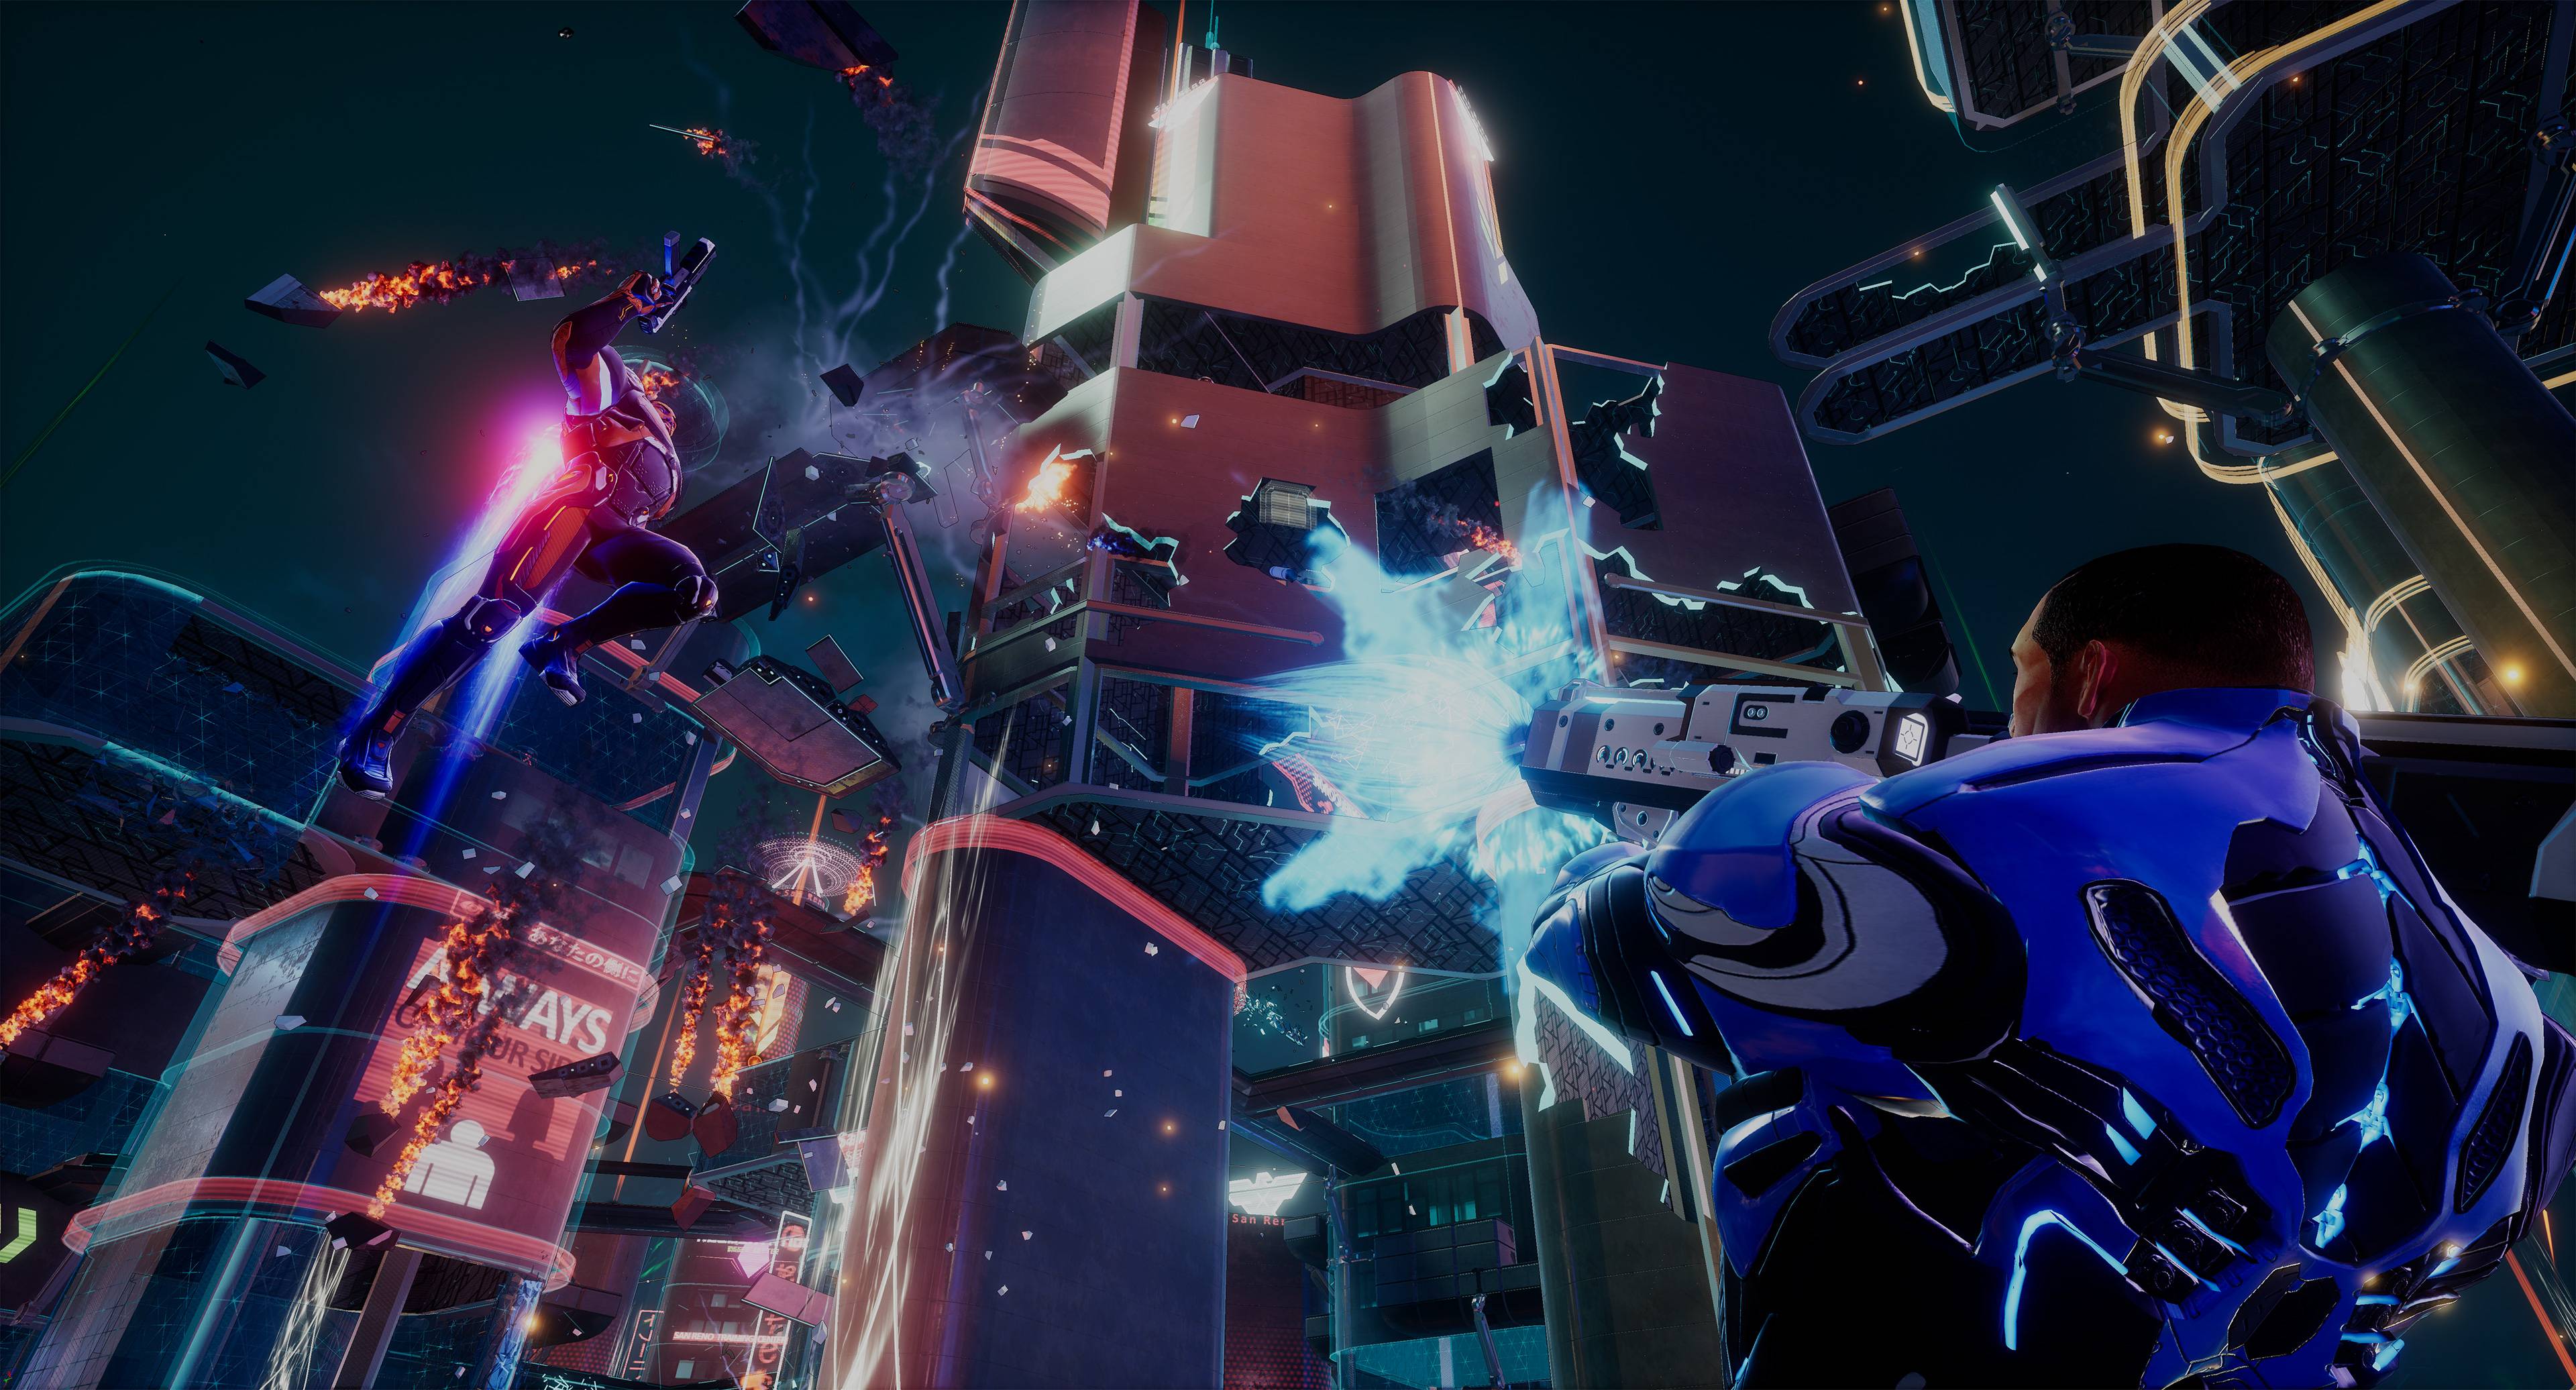 Crackdown 3 adds multiplayer options through a free update